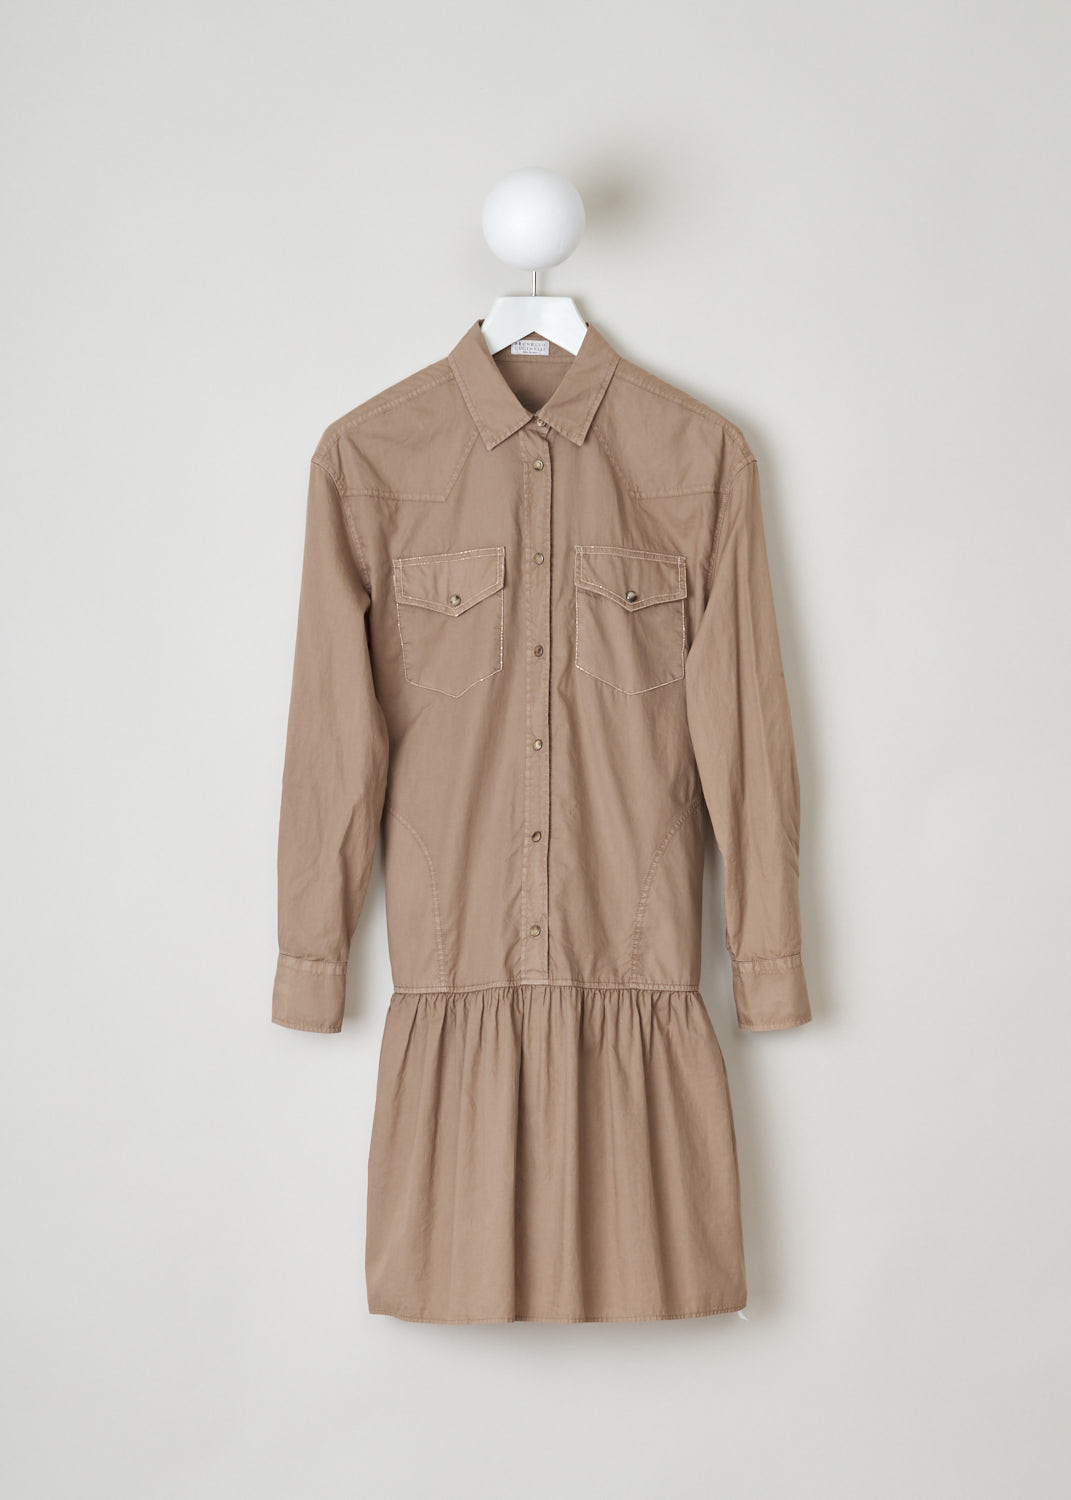 Brunello Cucinelli, Brown shirt dress, ML680AR321_C6067, brown, front, Brown shirt dress with a dropped waist. This cotton dress features a pointed collar, long sleeves with cuffs, which close with a single button. The signature, monili beads, on this model adorn the breast pockets. Your closing option is the buttons on the front.